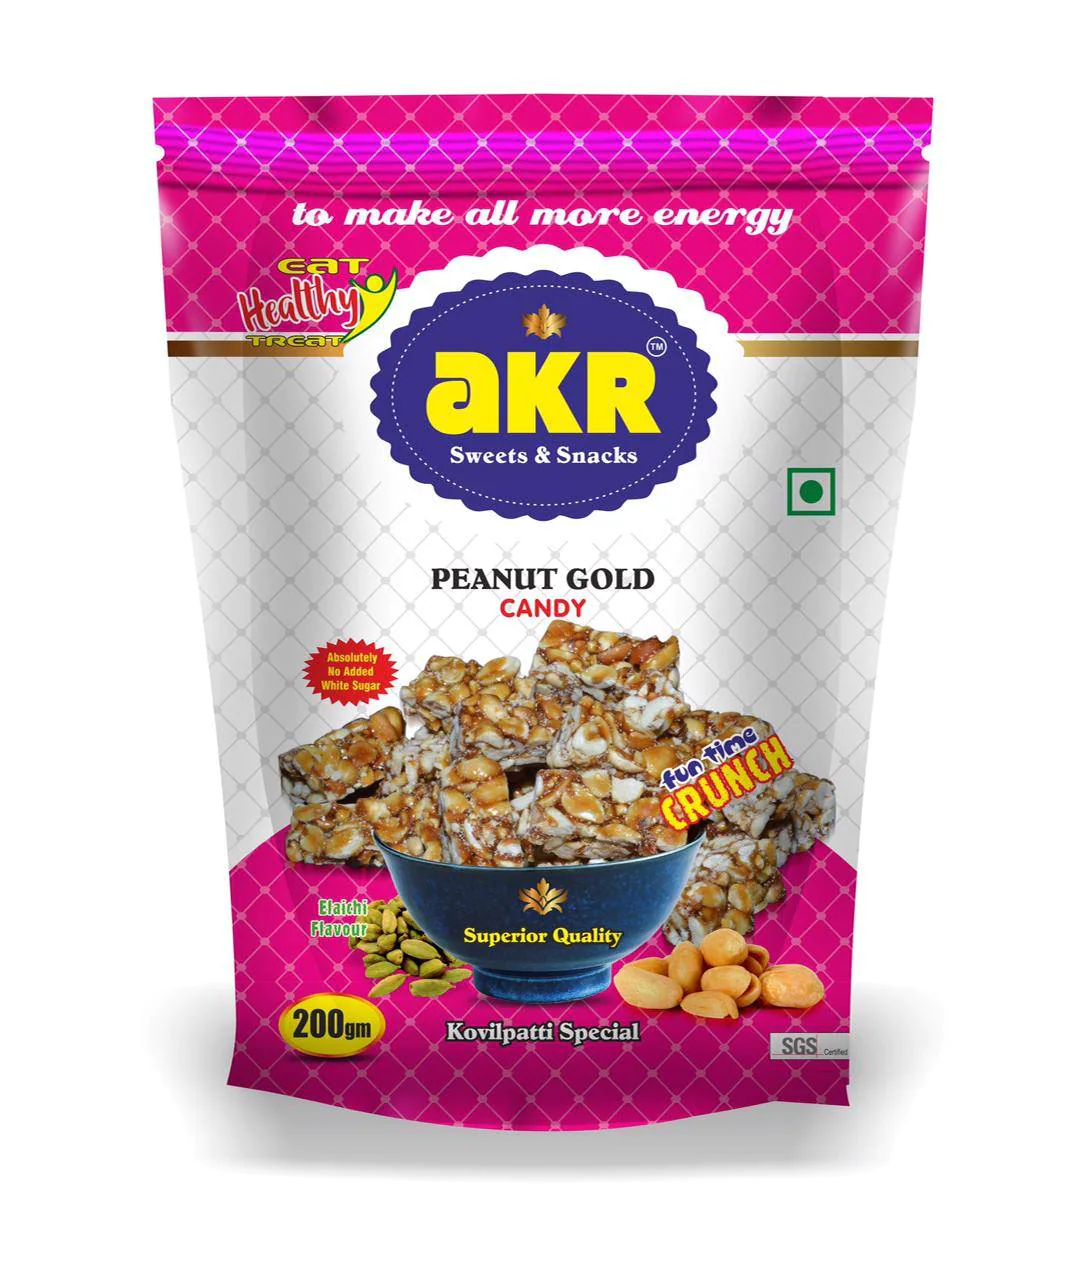 AKR - Peanut Gold Elaichi Flavour Candy | Kovilpatti Special | Nutritious Bar, No Added Preservatives and Colours | Pack of 2-Each of 200g